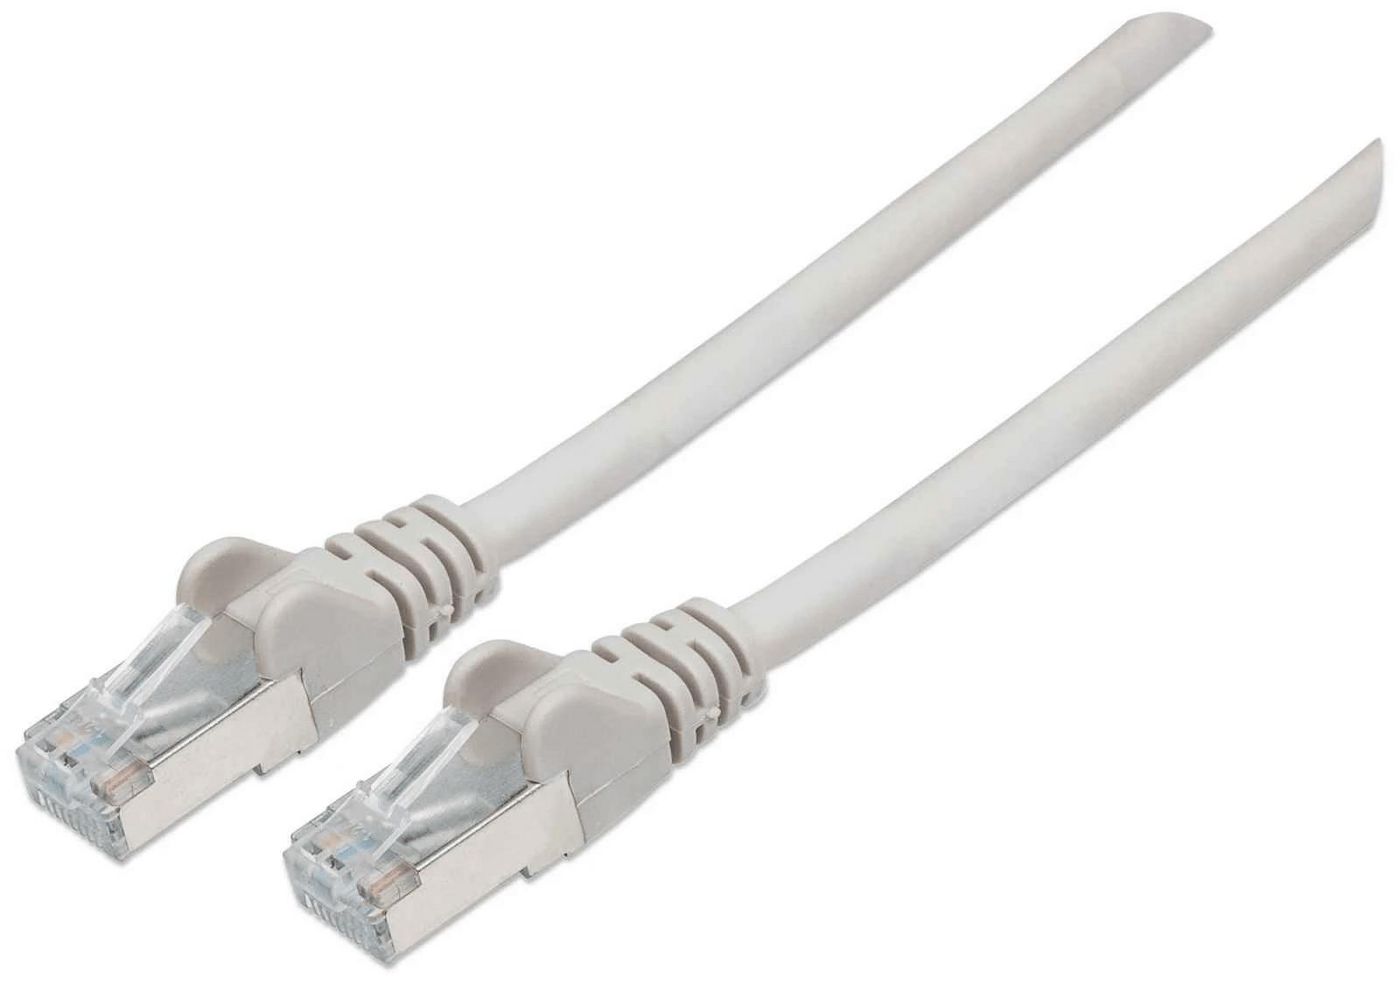 Intellinet 740739 High Performance Network Cable 